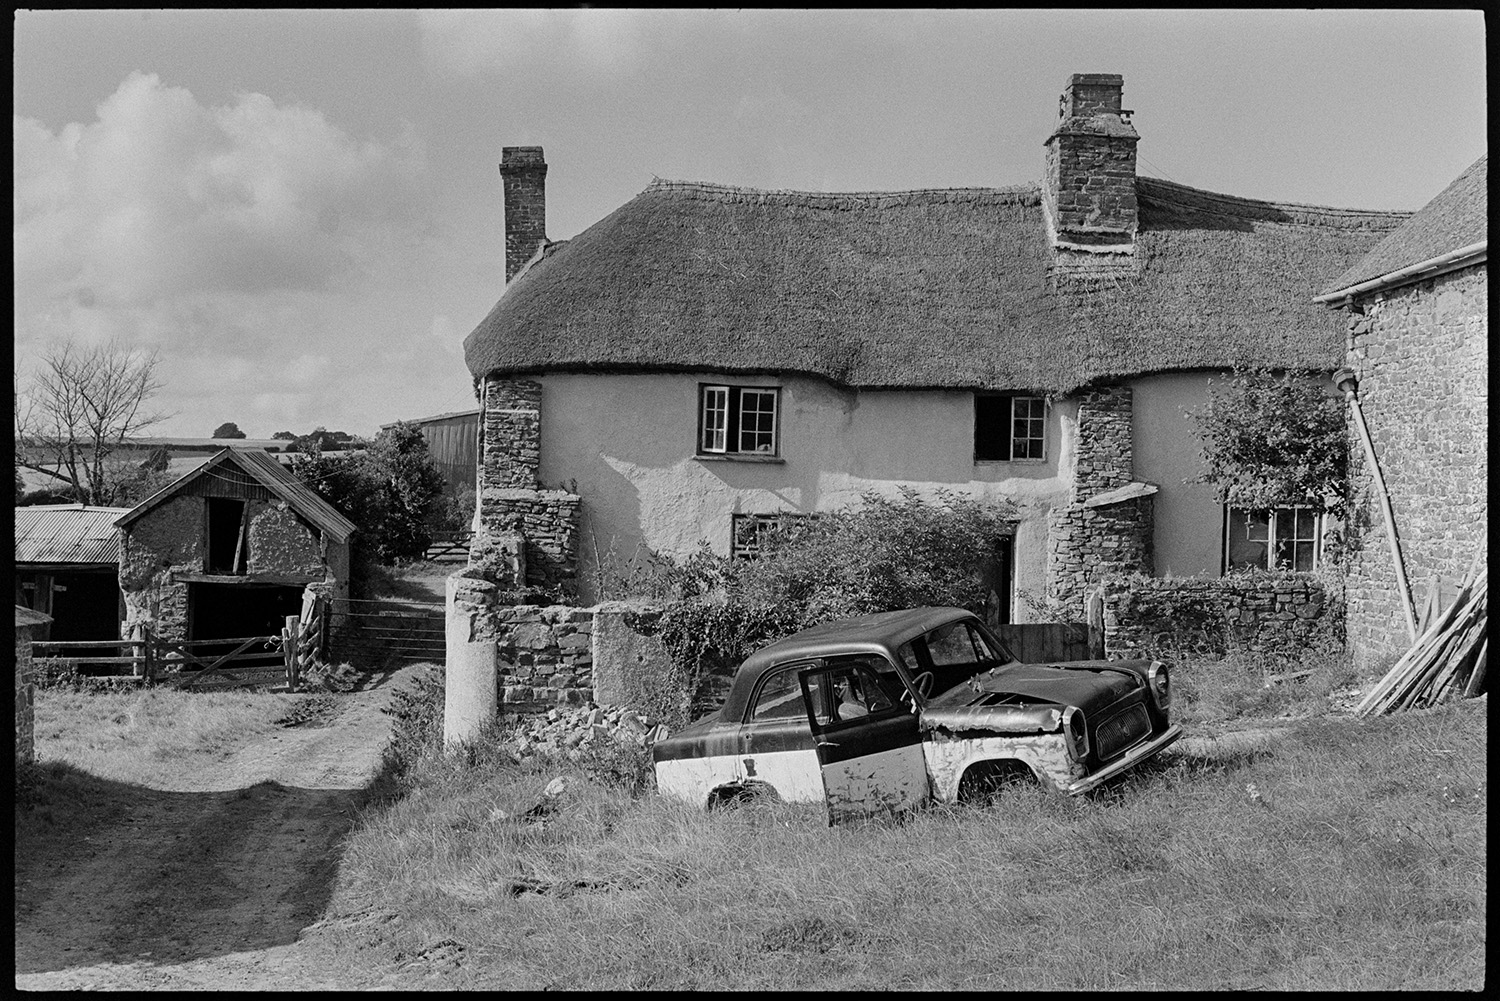 Thatched farmhouse with abandoned car. 
[A thatched farmhouse with out buildings, possibly at Redland, Ashreigney. A abandoned car is parked on the grass in the foreground.]